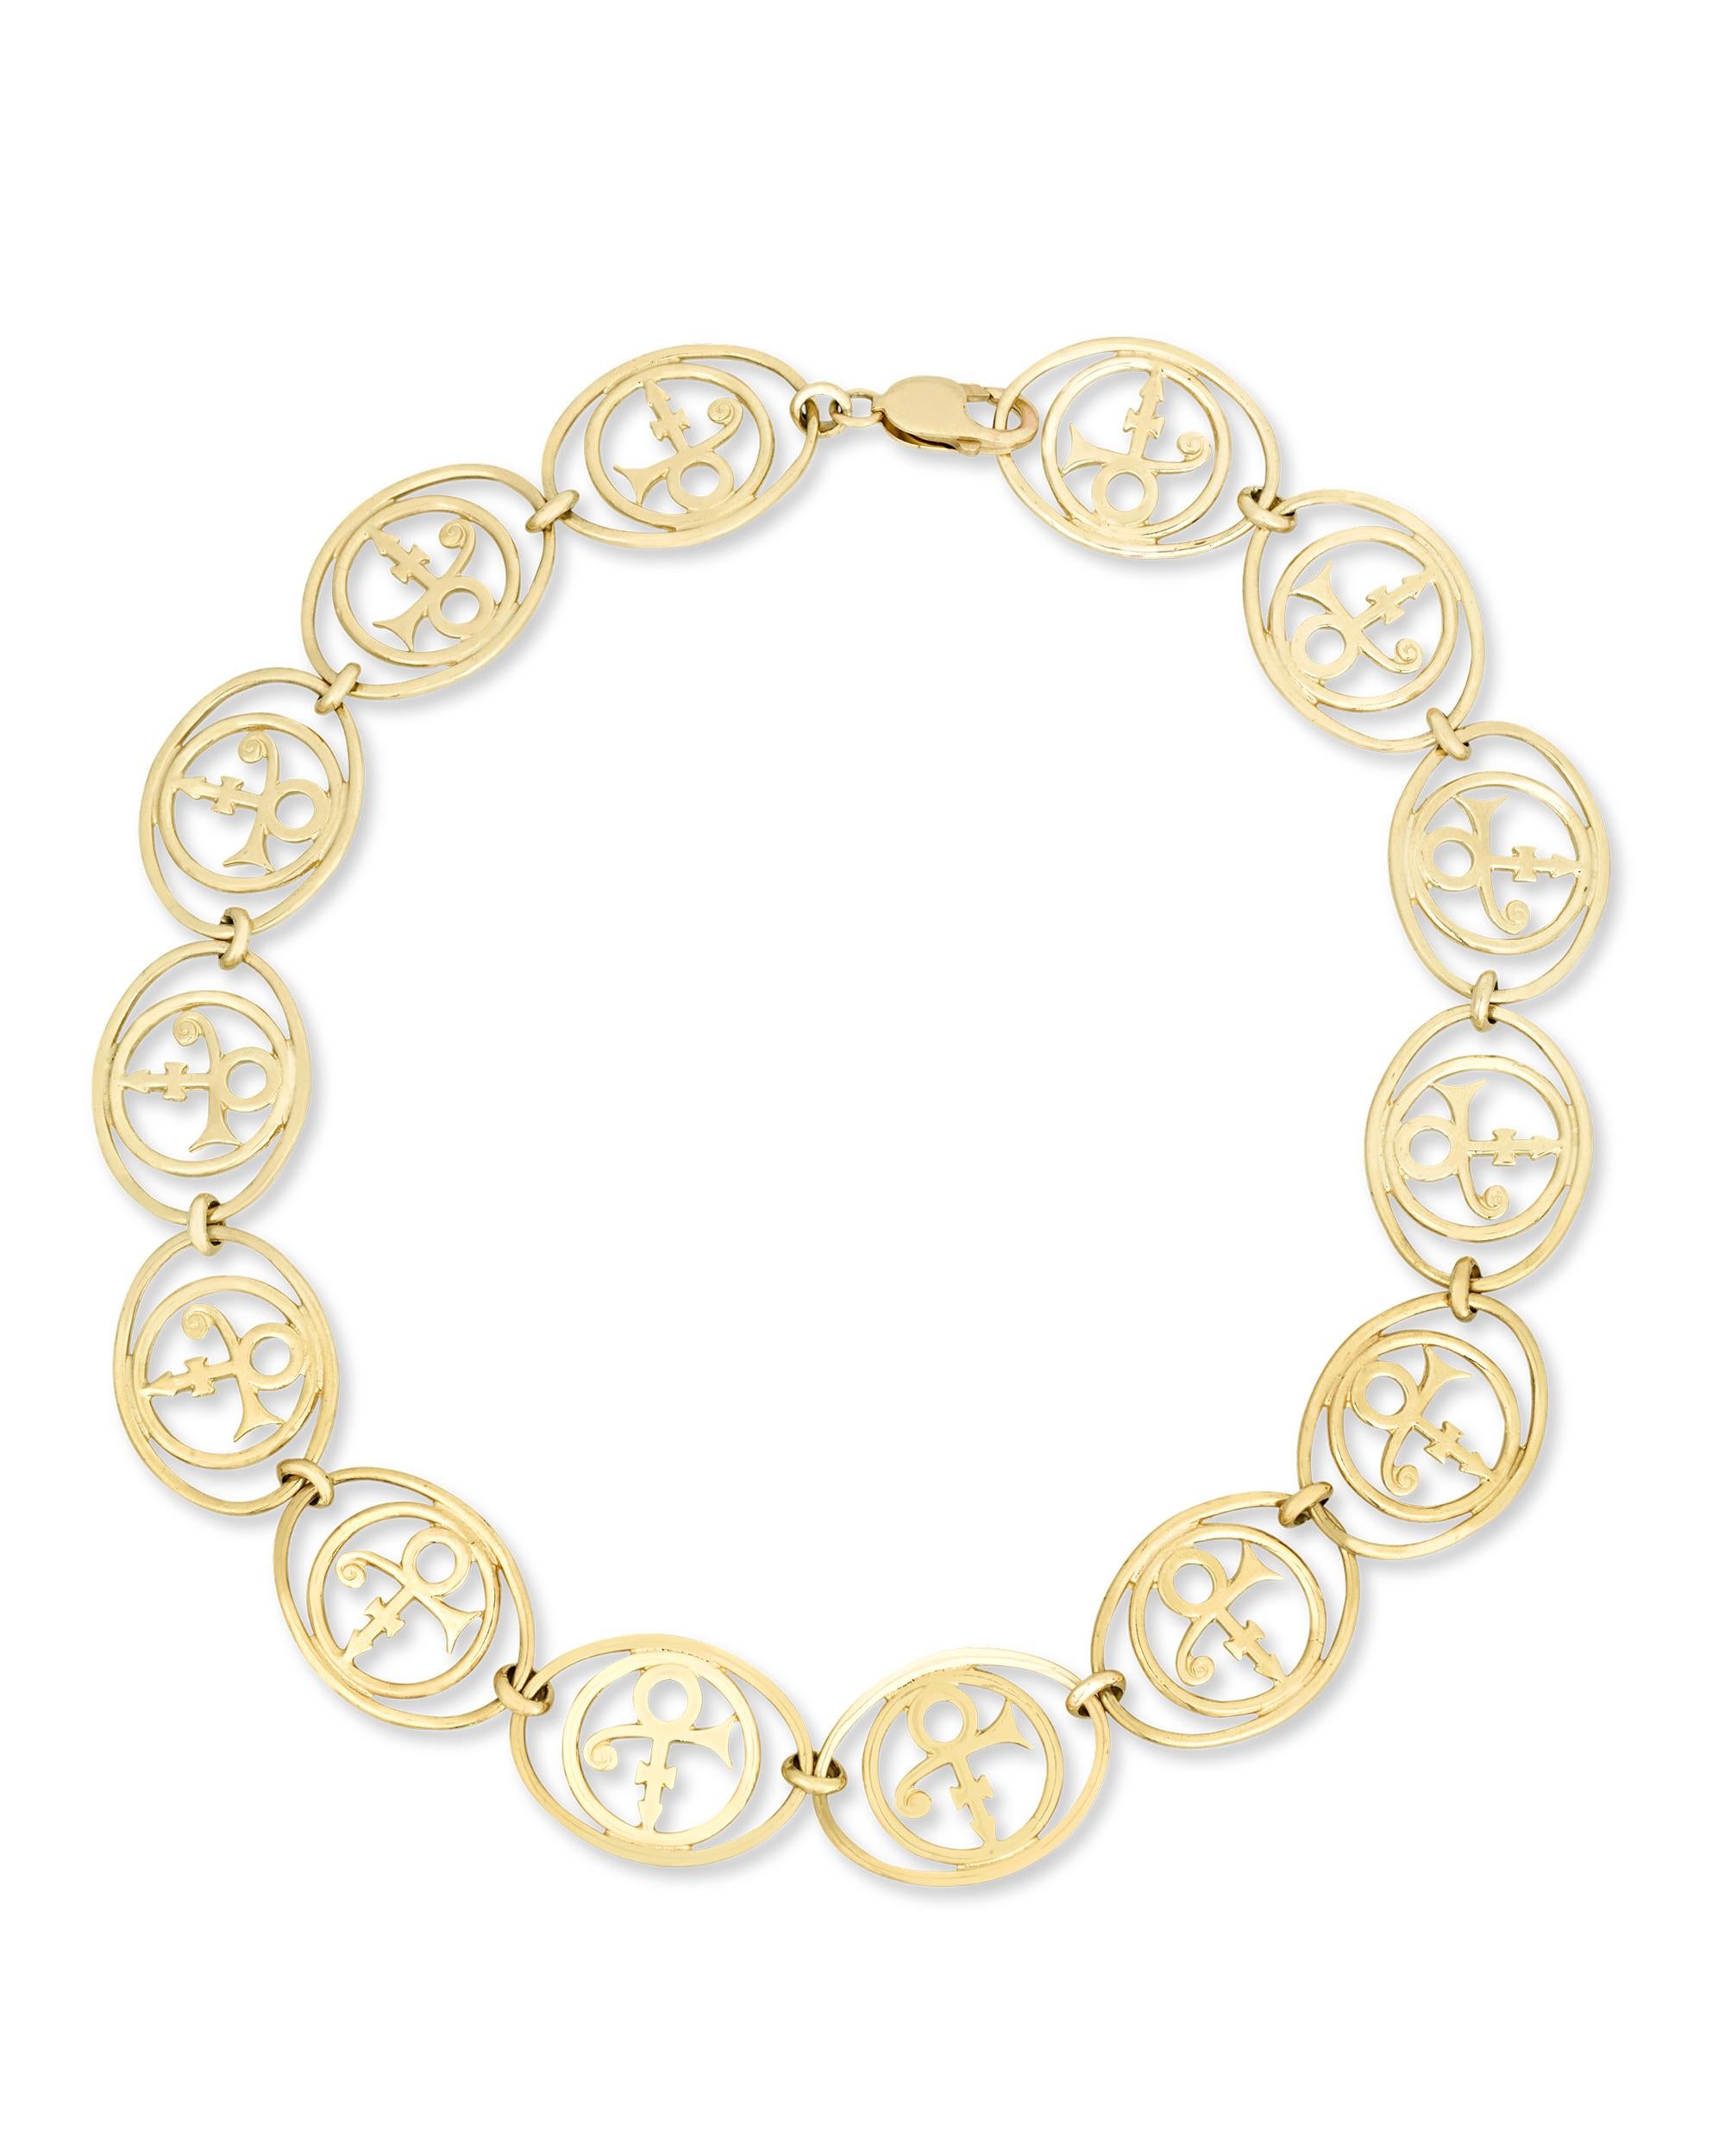 Made especially for one of the most celebrated pop icons of the modern era, this 10K yellow gold necklace was once owned by Prince. The necklace is comprised of openwork medallions that feature Prince's iconic 